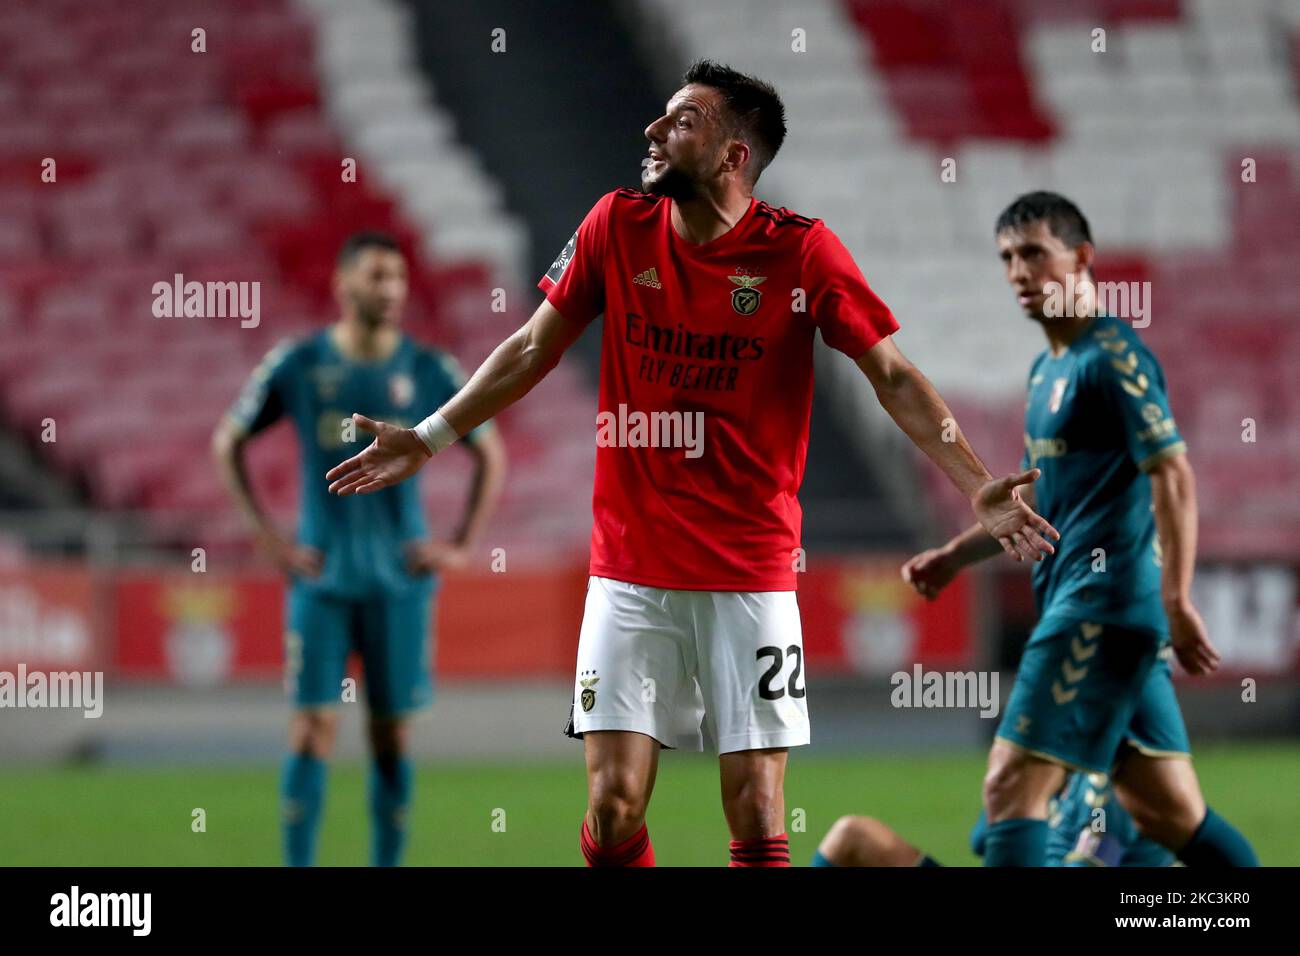 Andreas Samaris of SL Benfica reacts during the Portuguese League football match between SL Benfica and SC Braga at the Luz stadium in Lisbon, Portugal on November 8, 2020. (Photo by Pedro FiÃºza/NurPhoto) Stock Photo